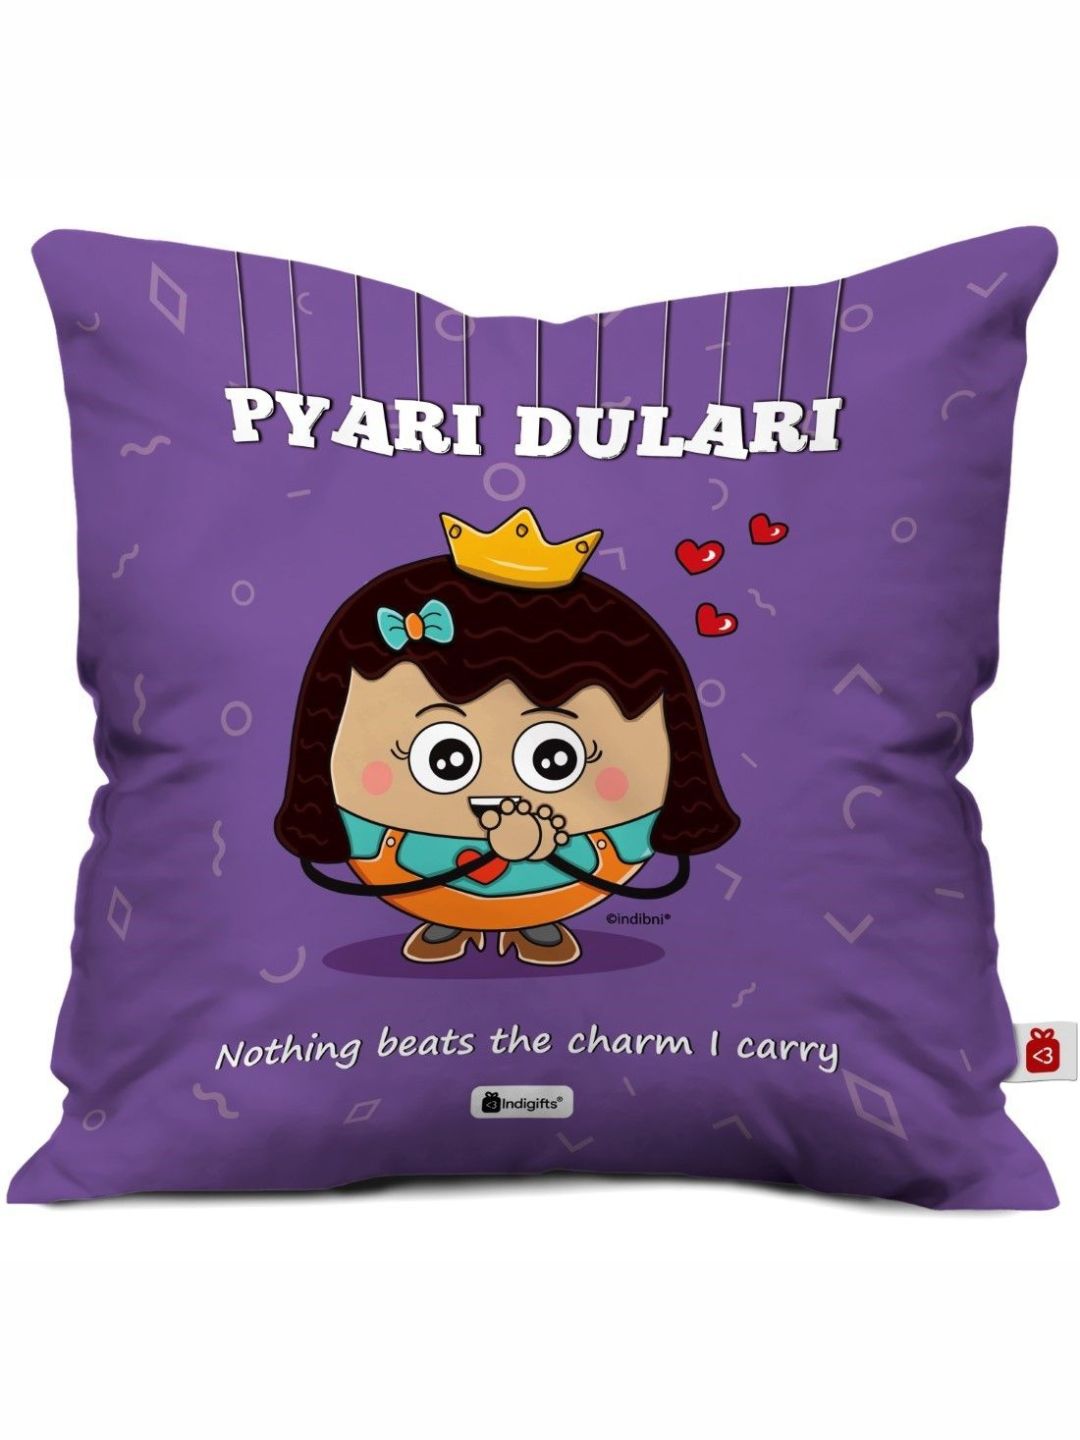 Indigifts Printed Cushion Cover with Filler | Pyari Dulari | Polysatin | 12×12 Inches | Comfortable Purple Cushions | Friends Cushion Pillow| Gift for Friends Birthday | Soft Decorative Pillows